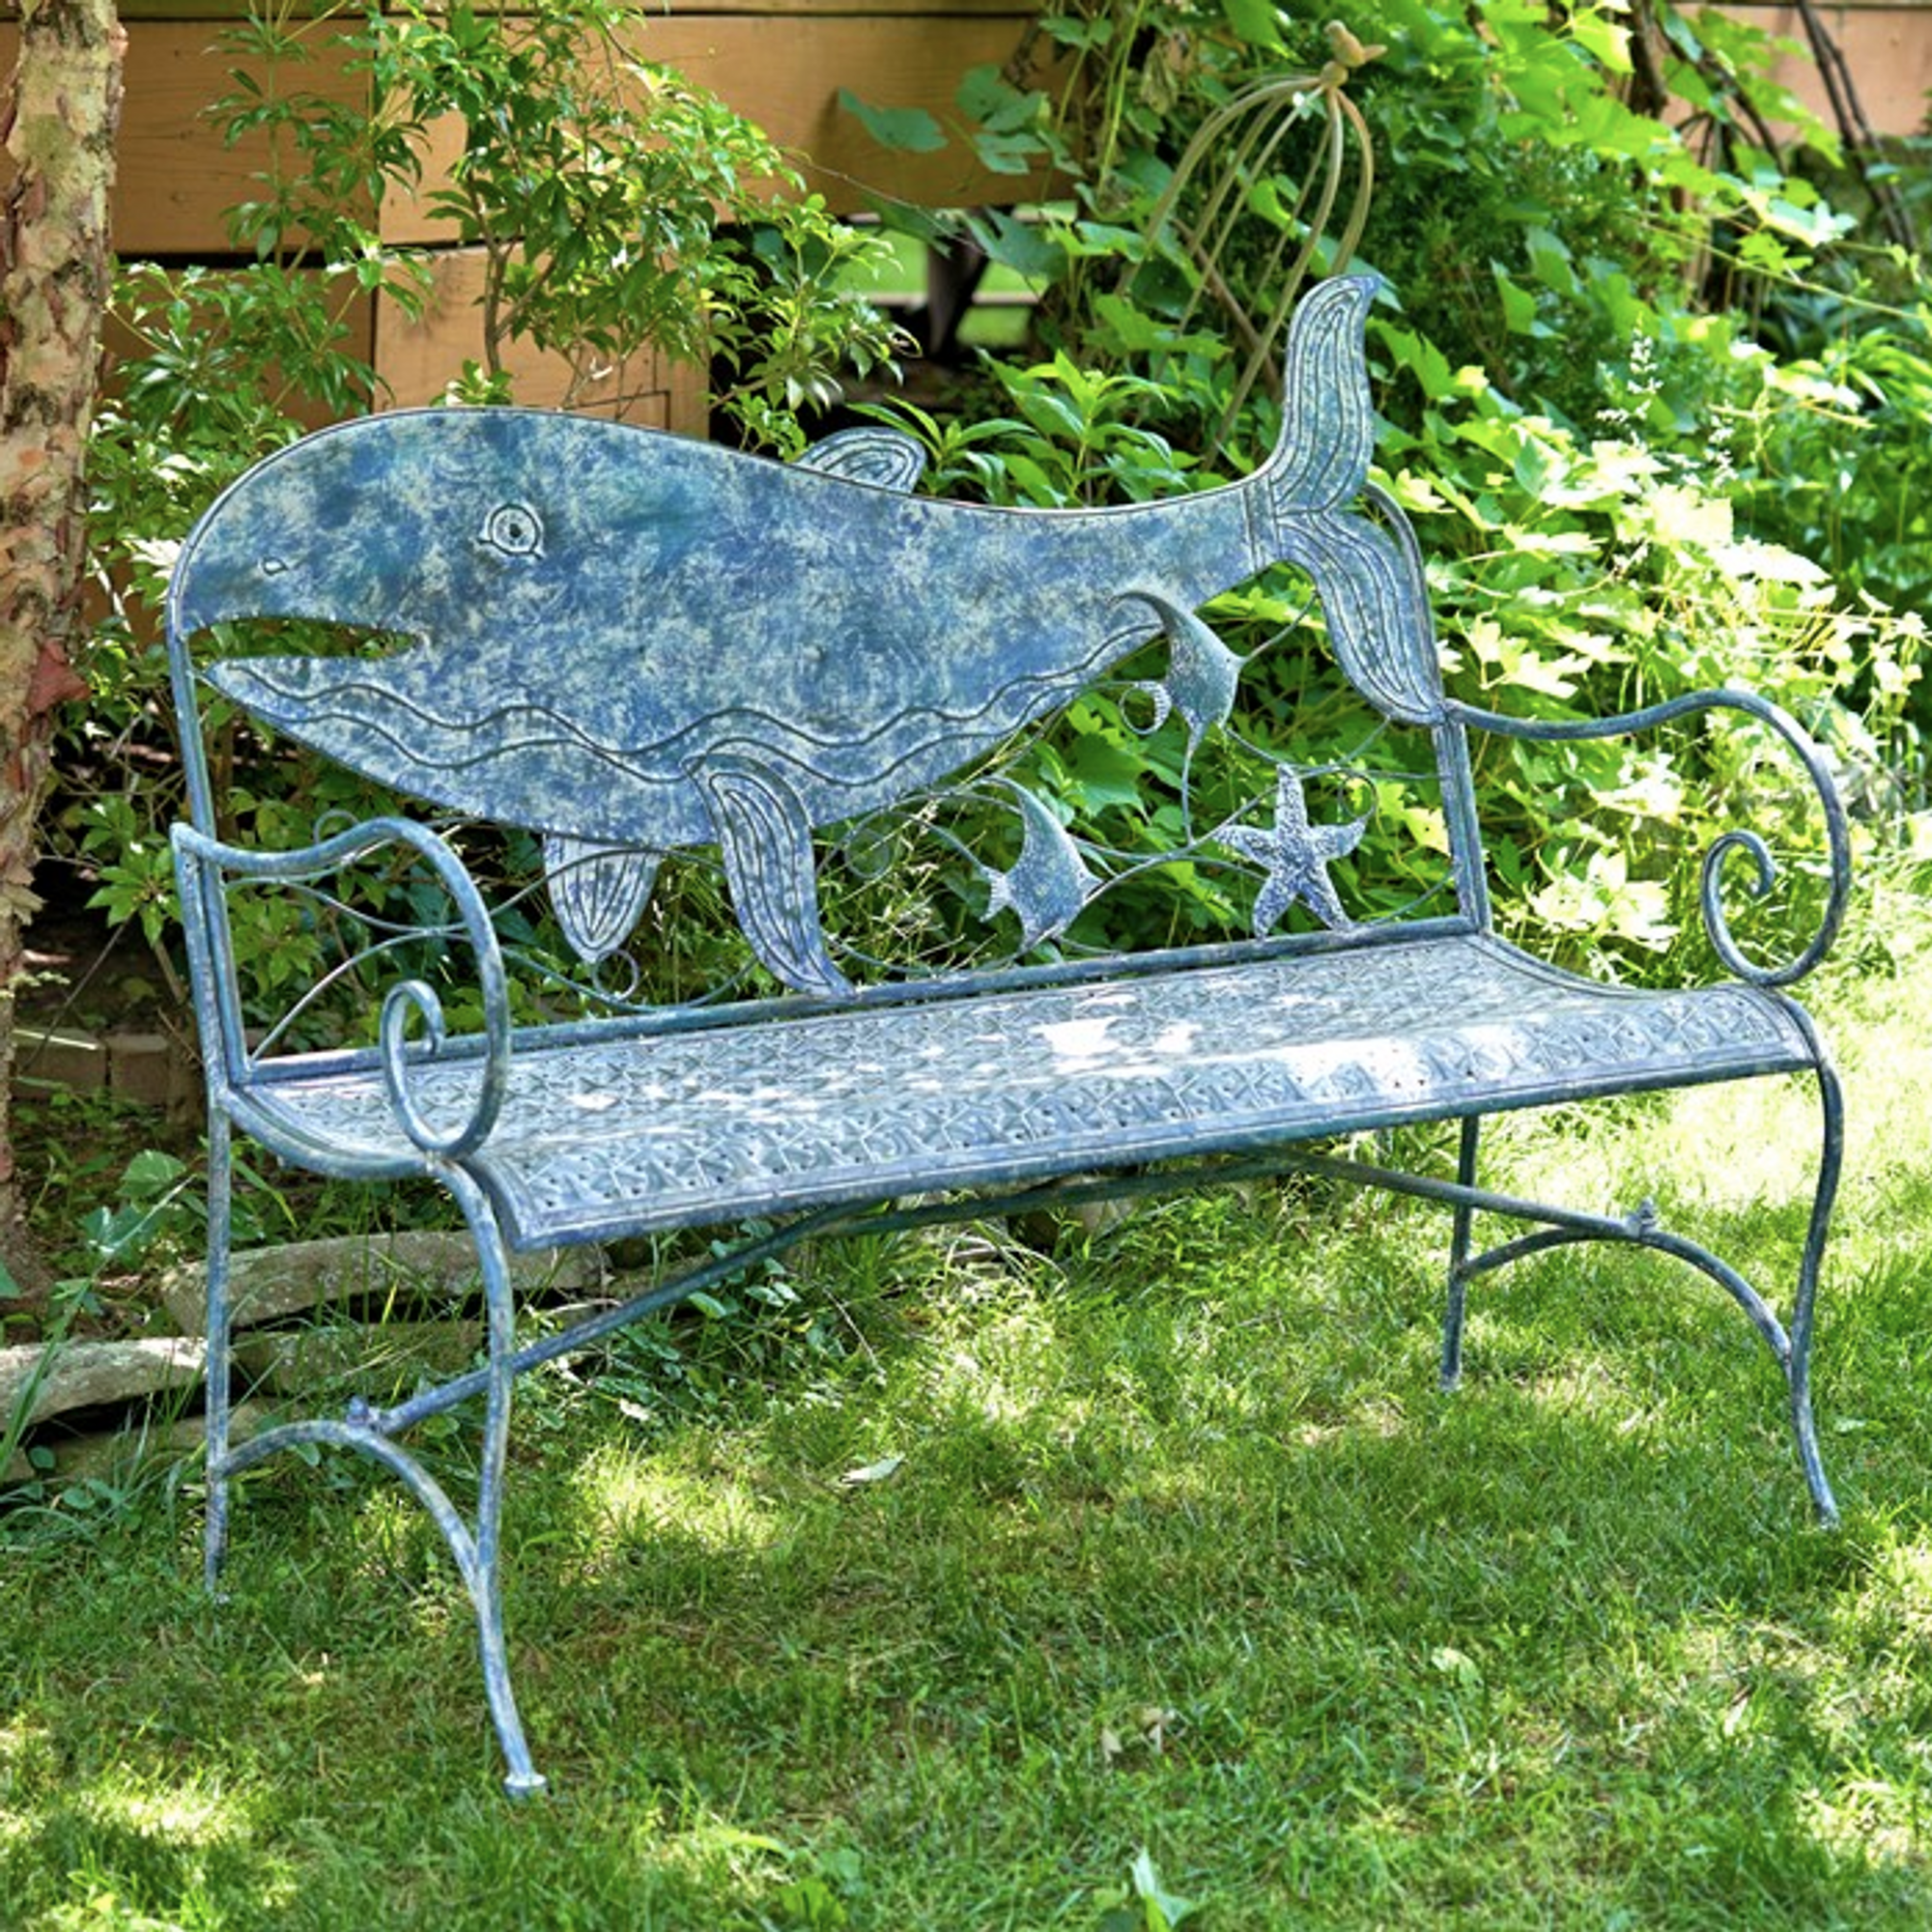 Olive Grove Metal Garden Bench with Cast Iron Birds Design Back Rest With Cushion Worth £ 19.99 Garden Market Place